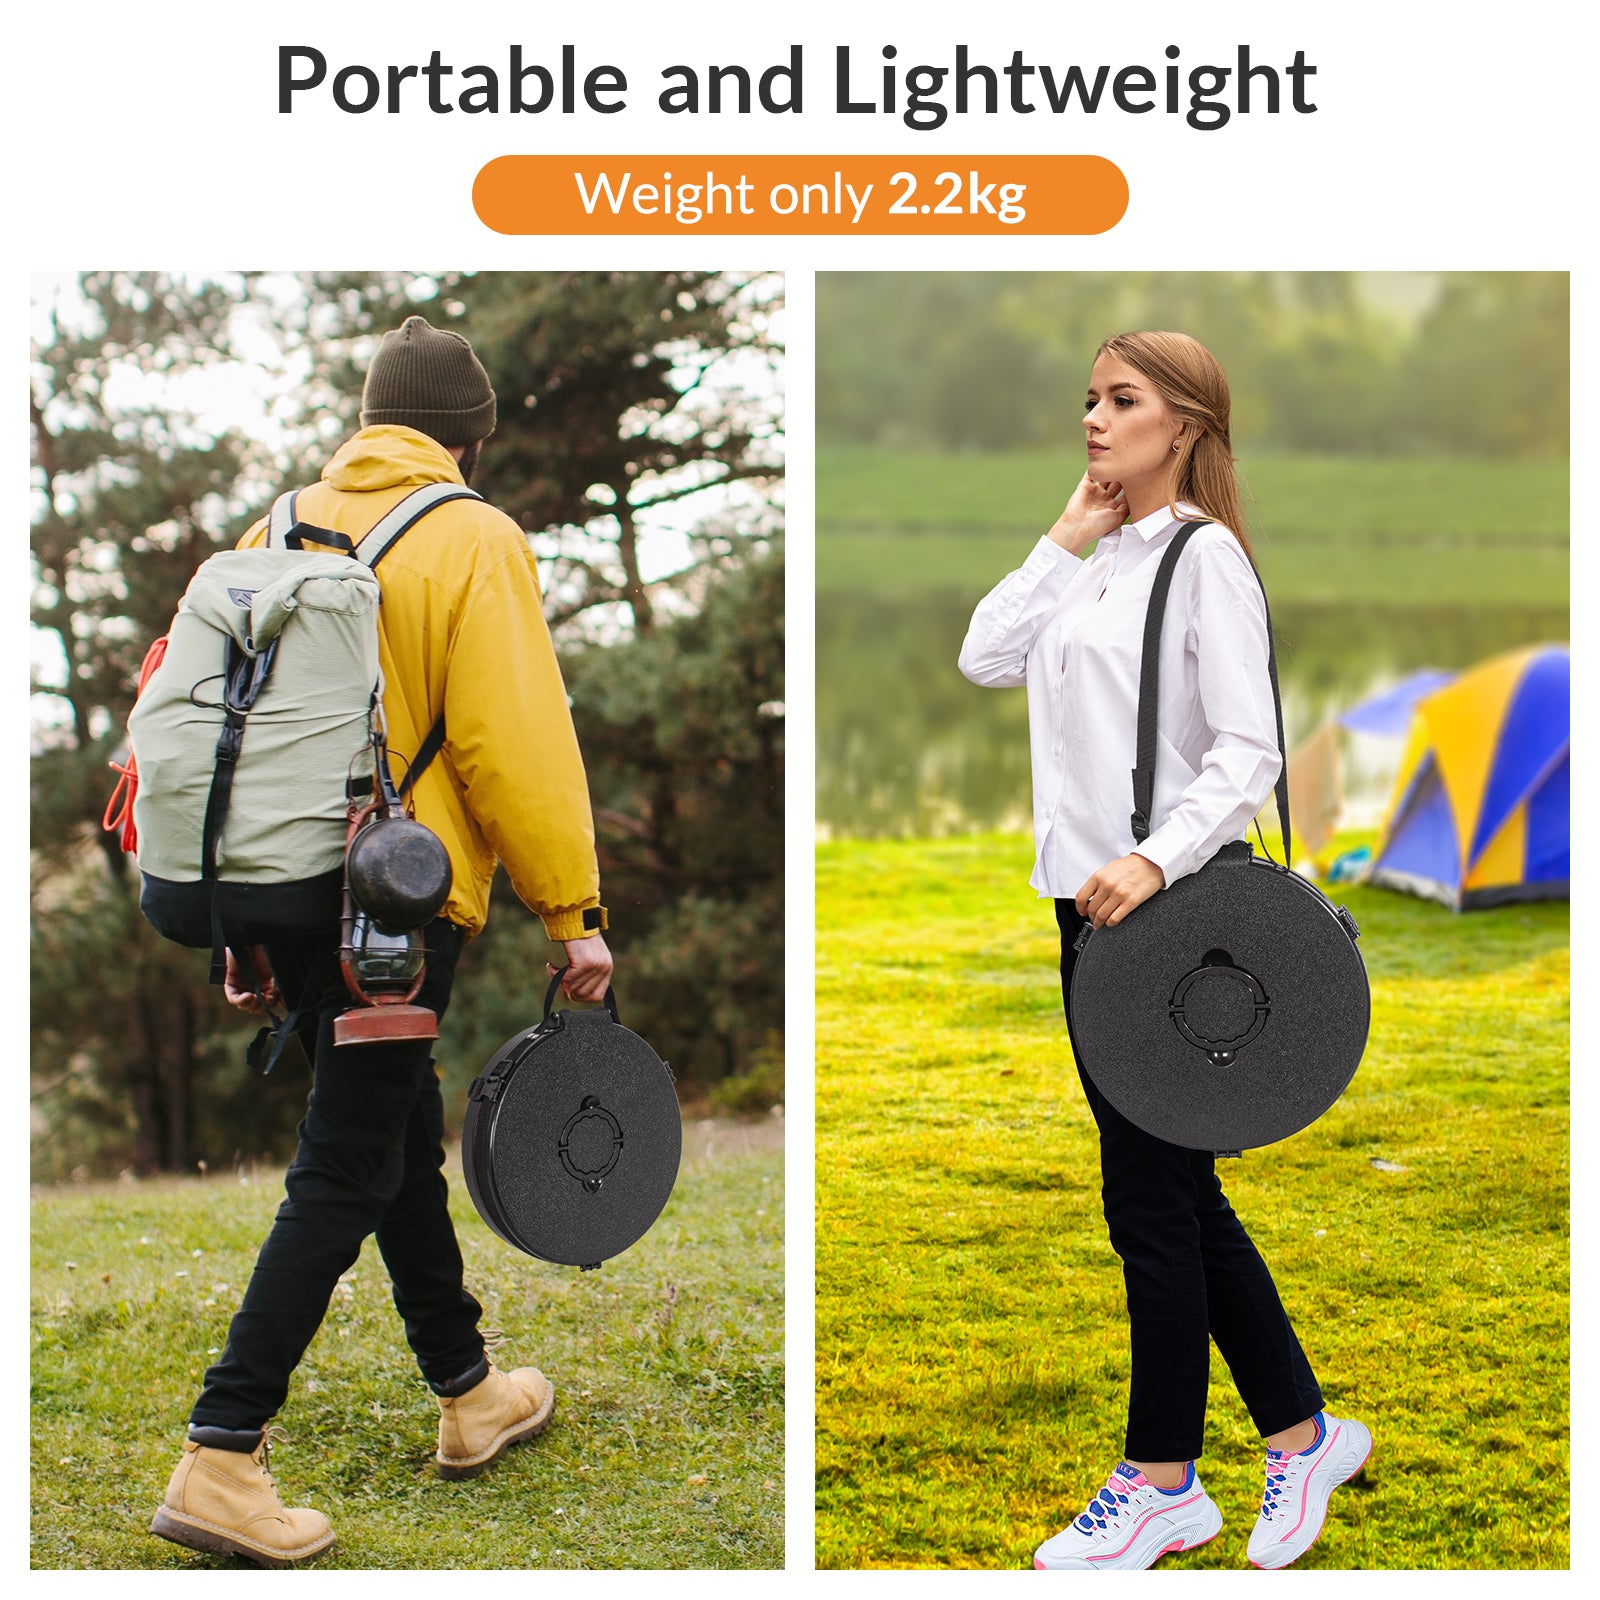 Leogreen-Portable-Camping-Toilet-Portable-Foldable-Lightweight-Hygiene-Hiking-Toilet-Toliet-for-Men-and-Women-for-Camping-Hiking-Excursions-Black